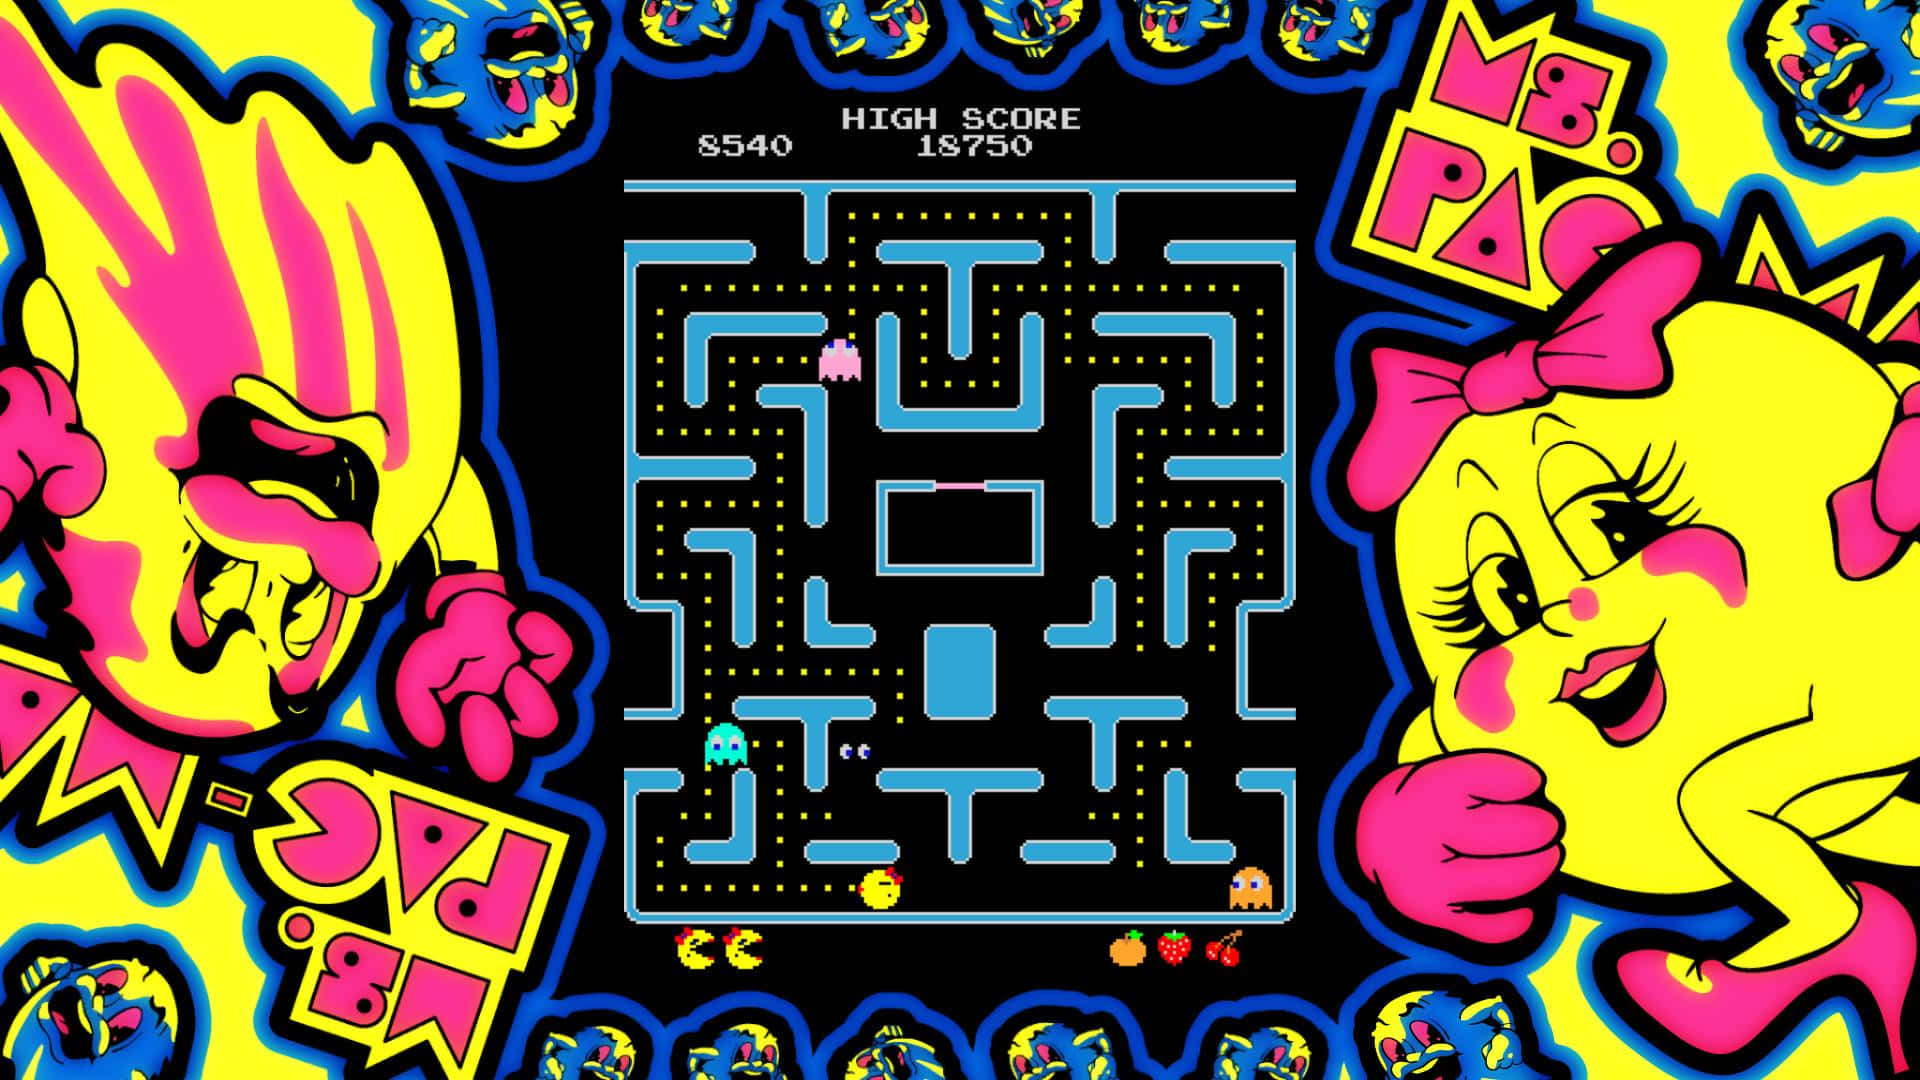 Iconic Pac-Man Arcade Game on a Vibrant Blue Background